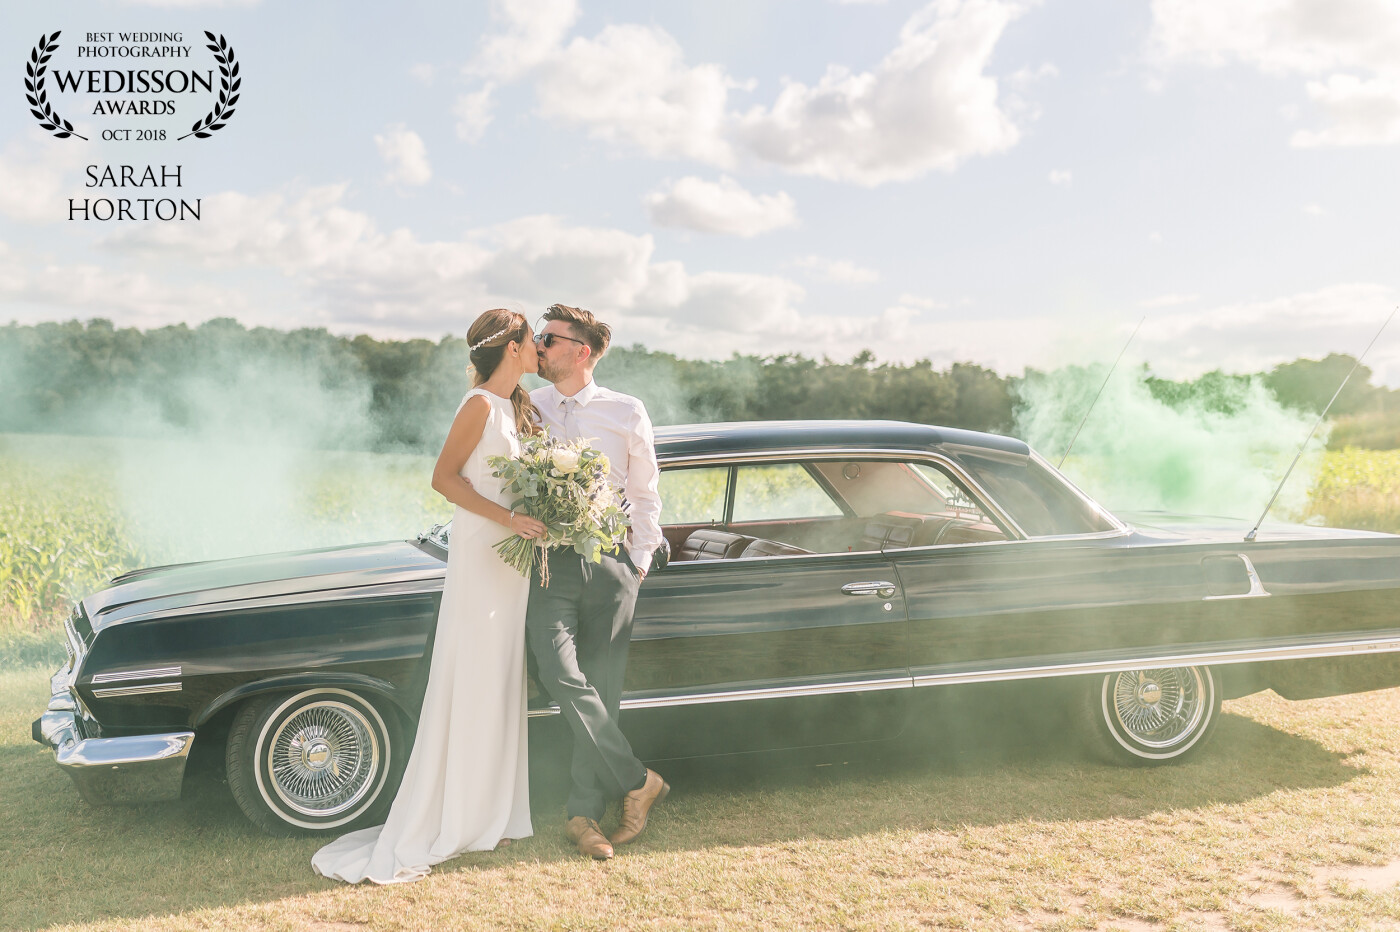 Matt & Emma were married at Alcumlow Wedding Barn in Congleton, with Matt's beloved 1963 Chevy Impala acting as wedding car. The venue mentioned they'd got some leftover smoke bombs and this happened! 